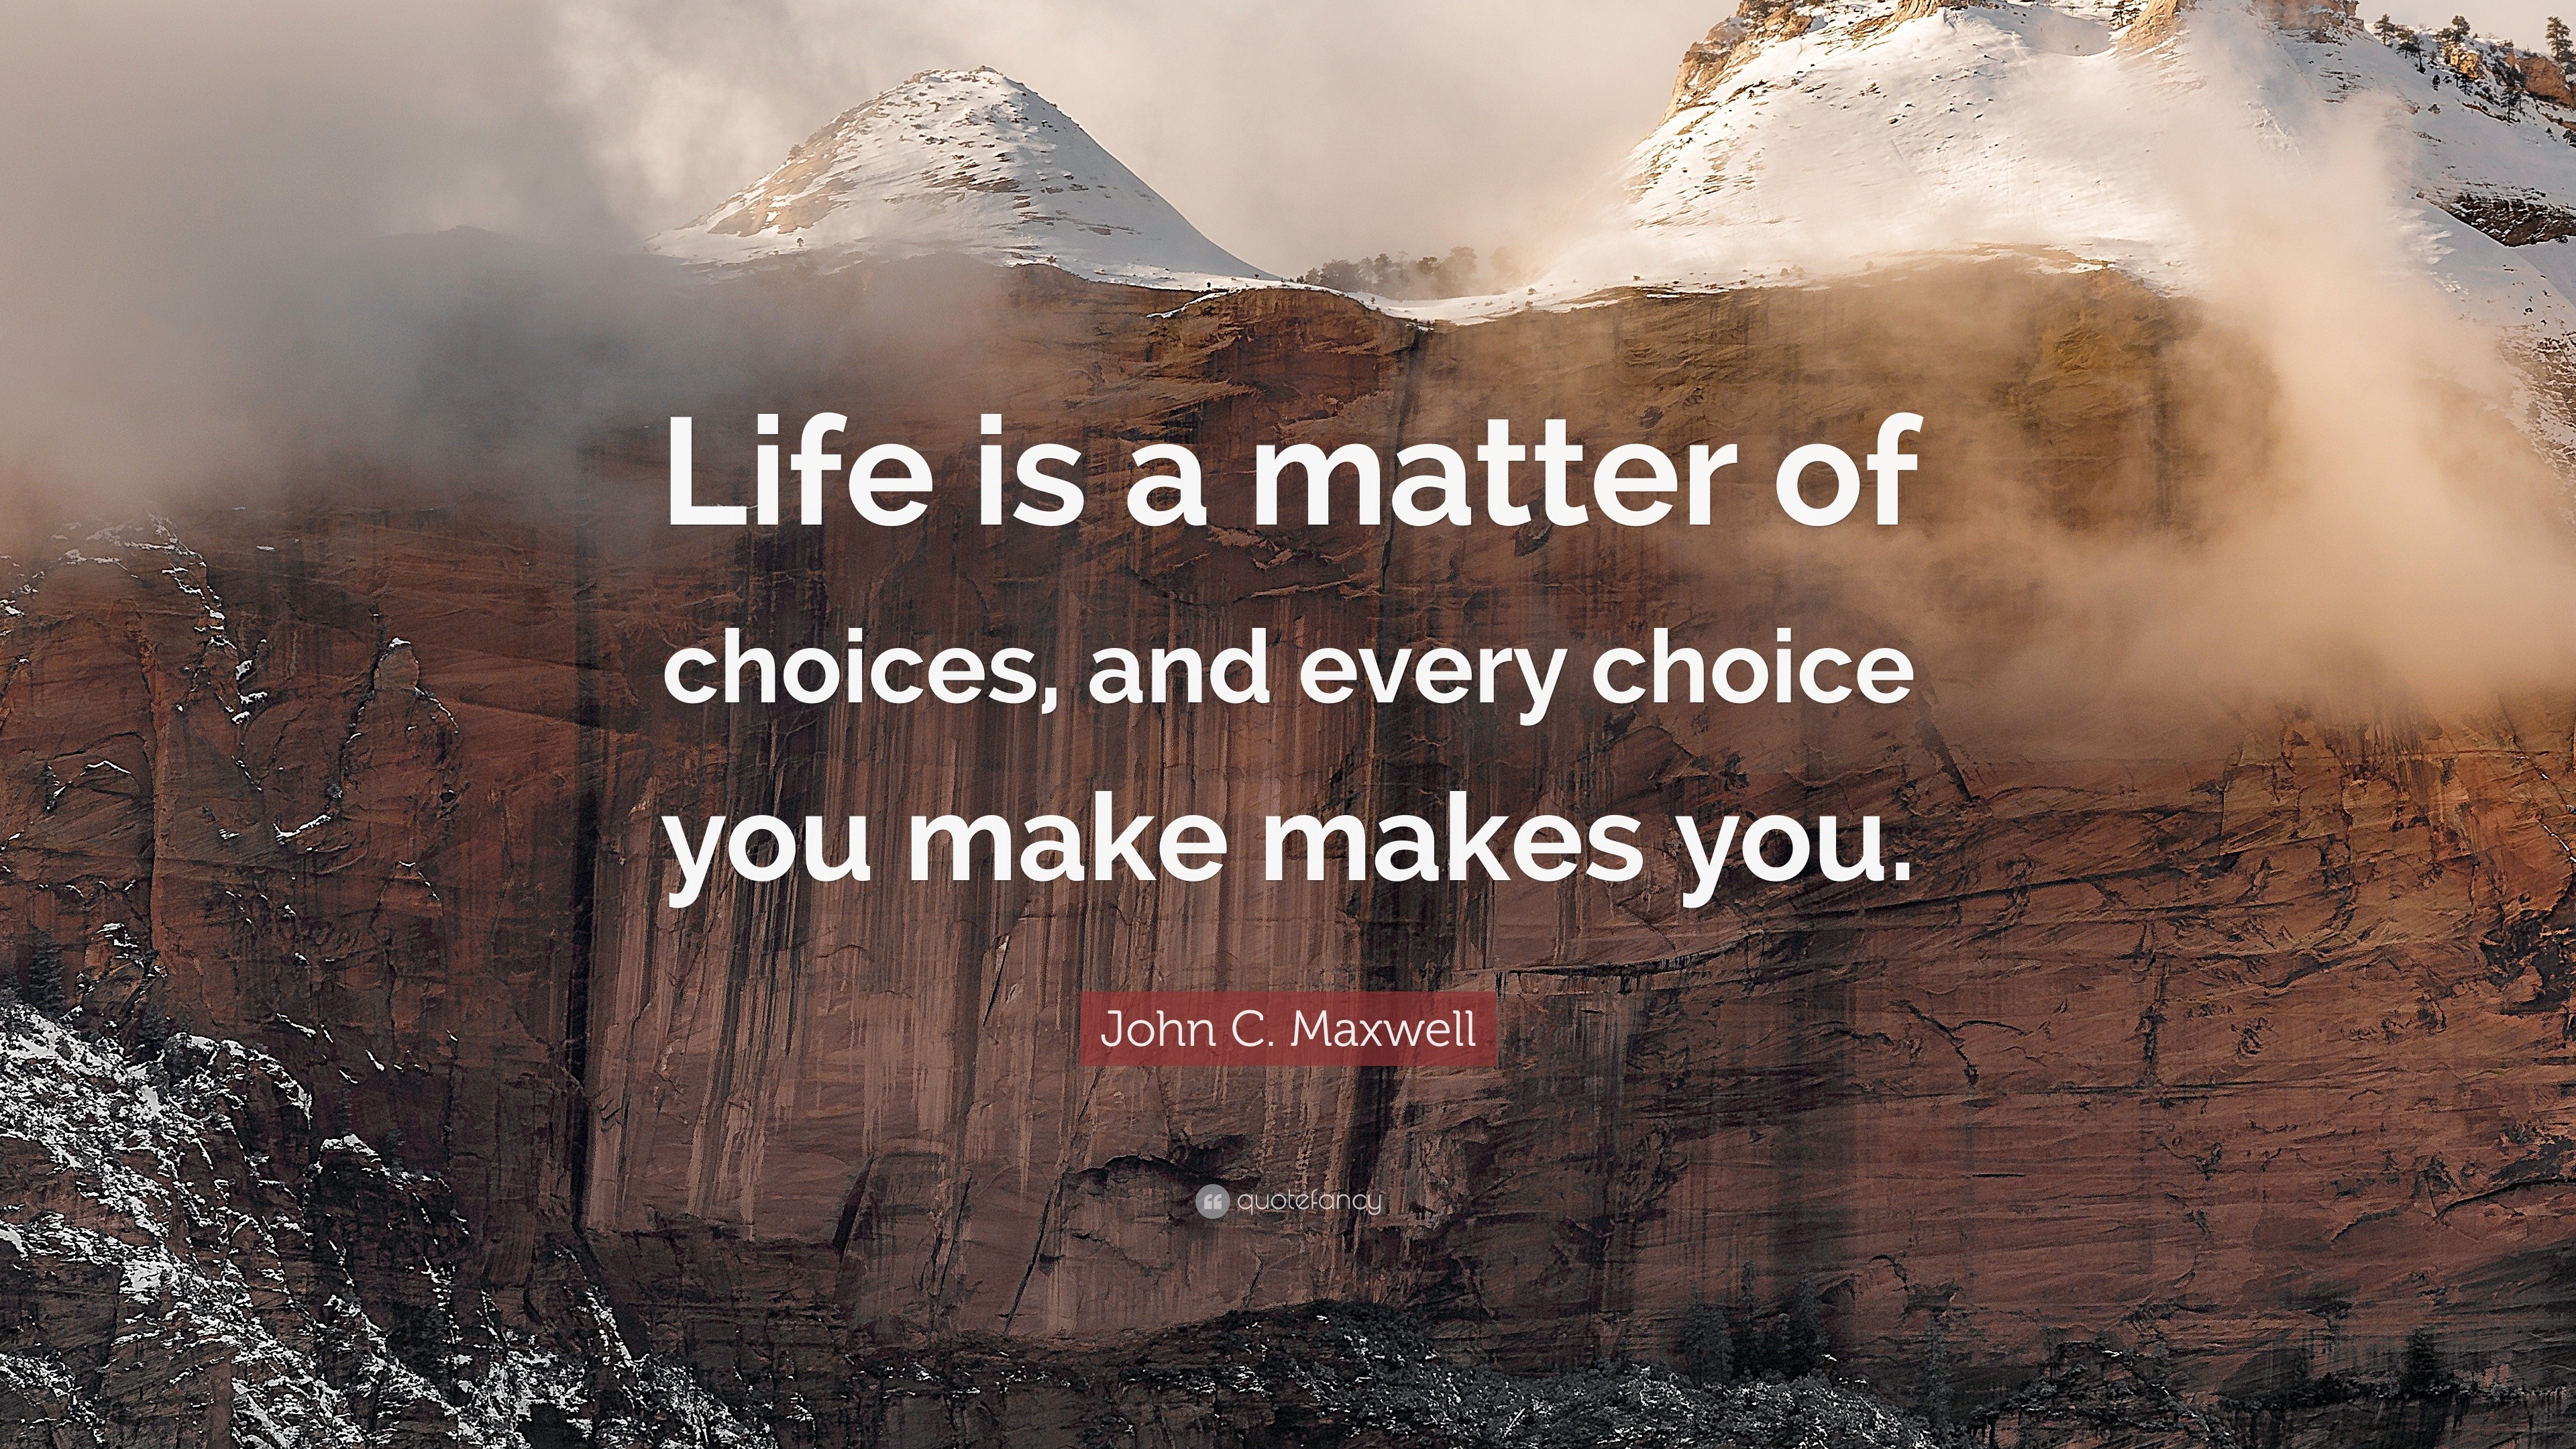 John C. Maxwell Quote: “Life is a matter of choices, and every choice